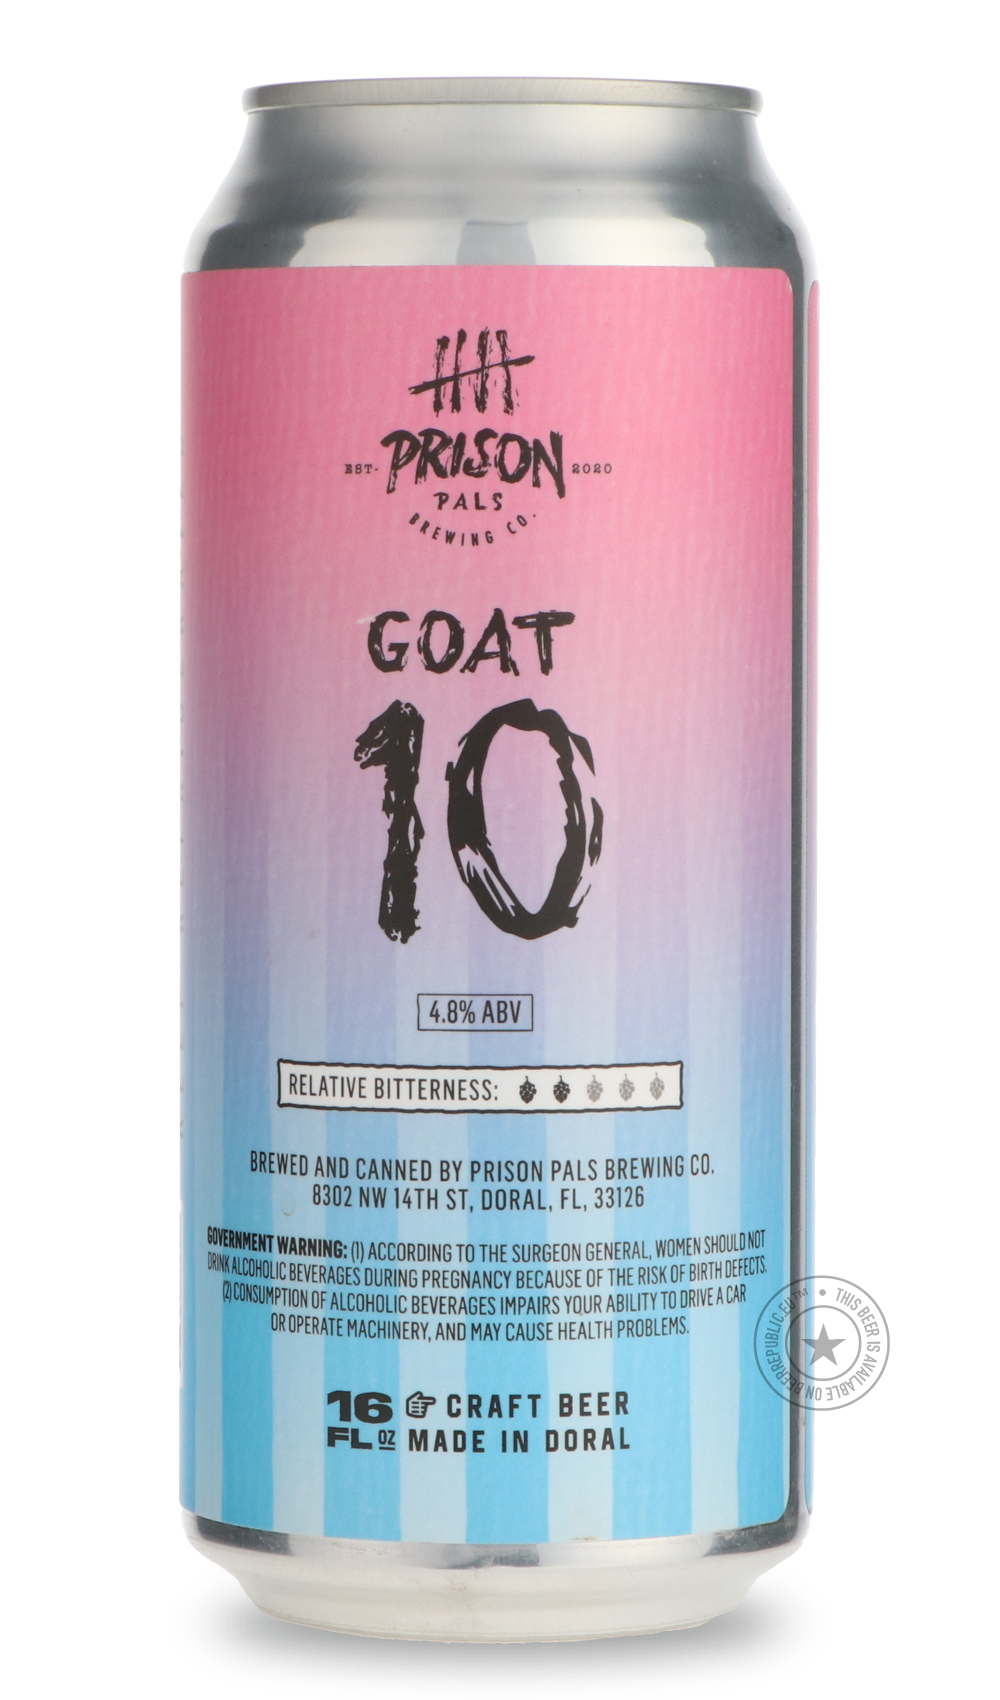 -Prison Pals- GOAT 10-Pale- Only @ Beer Republic - The best online beer store for American & Canadian craft beer - Buy beer online from the USA and Canada - Bier online kopen - Amerikaans bier kopen - Craft beer store - Craft beer kopen - Amerikanisch bier kaufen - Bier online kaufen - Acheter biere online - IPA - Stout - Porter - New England IPA - Hazy IPA - Imperial Stout - Barrel Aged - Barrel Aged Imperial Stout - Brown - Dark beer - Blond - Blonde - Pilsner - Lager - Wheat - Weizen - Amber - Barley Win